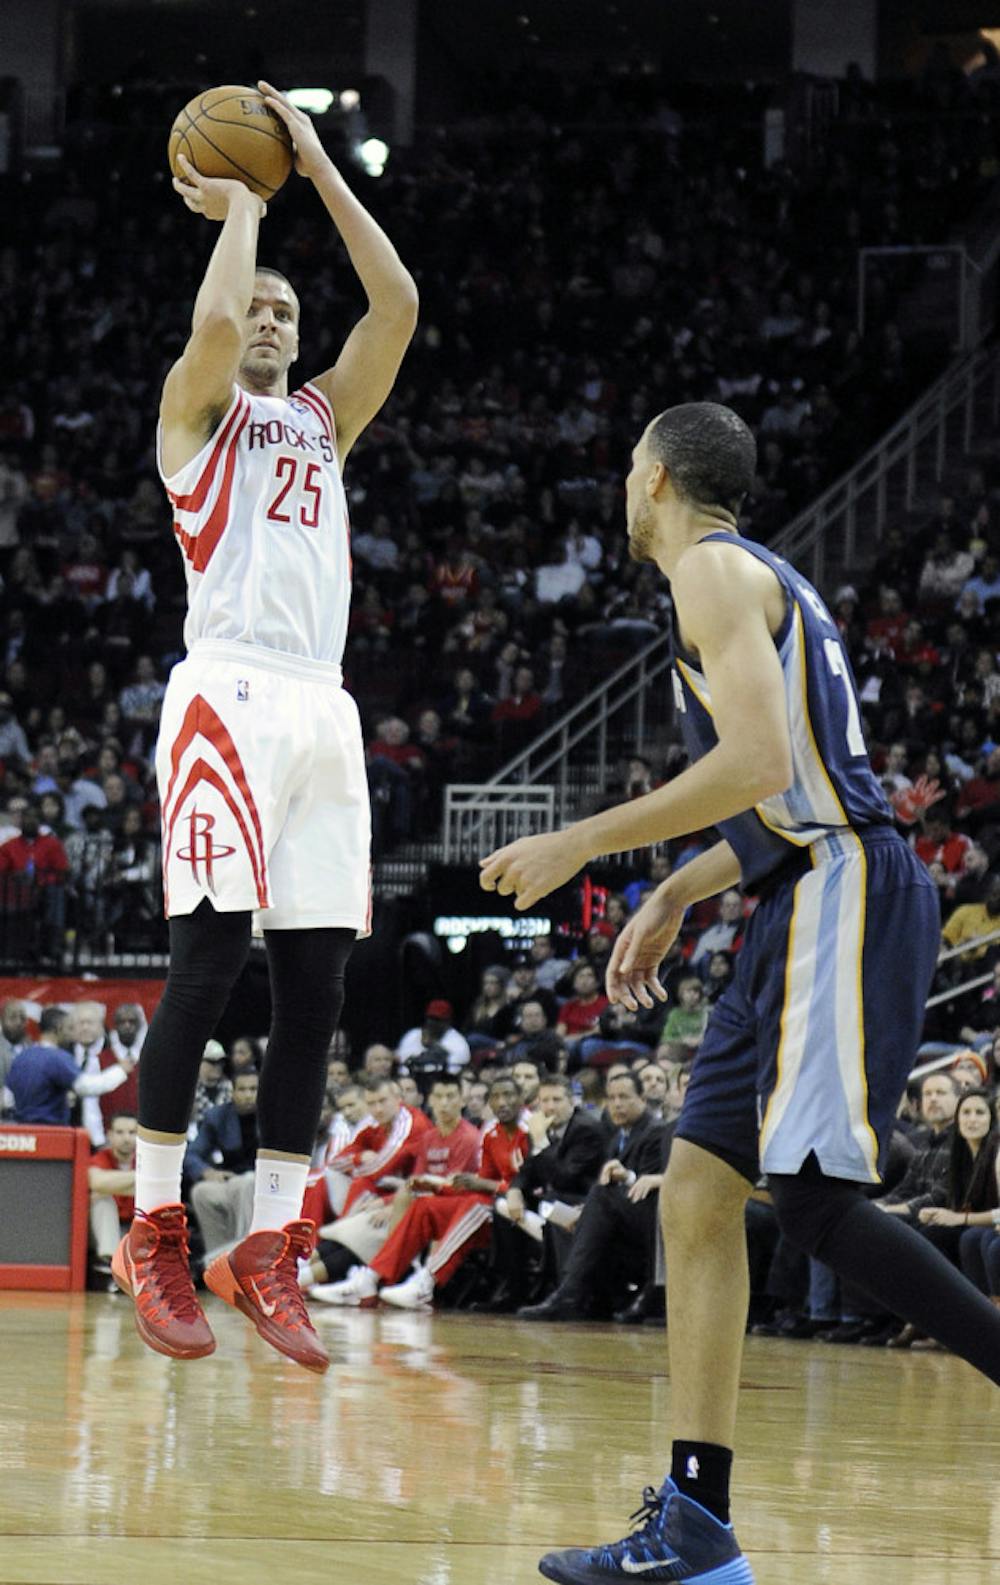 <p>Houston Rockets’ Chandler Parsons (25) shoots a three-point shot as Memphis Grizzlies’ Tayshaun Prince watches on Jan. 24 in Houston.</p>